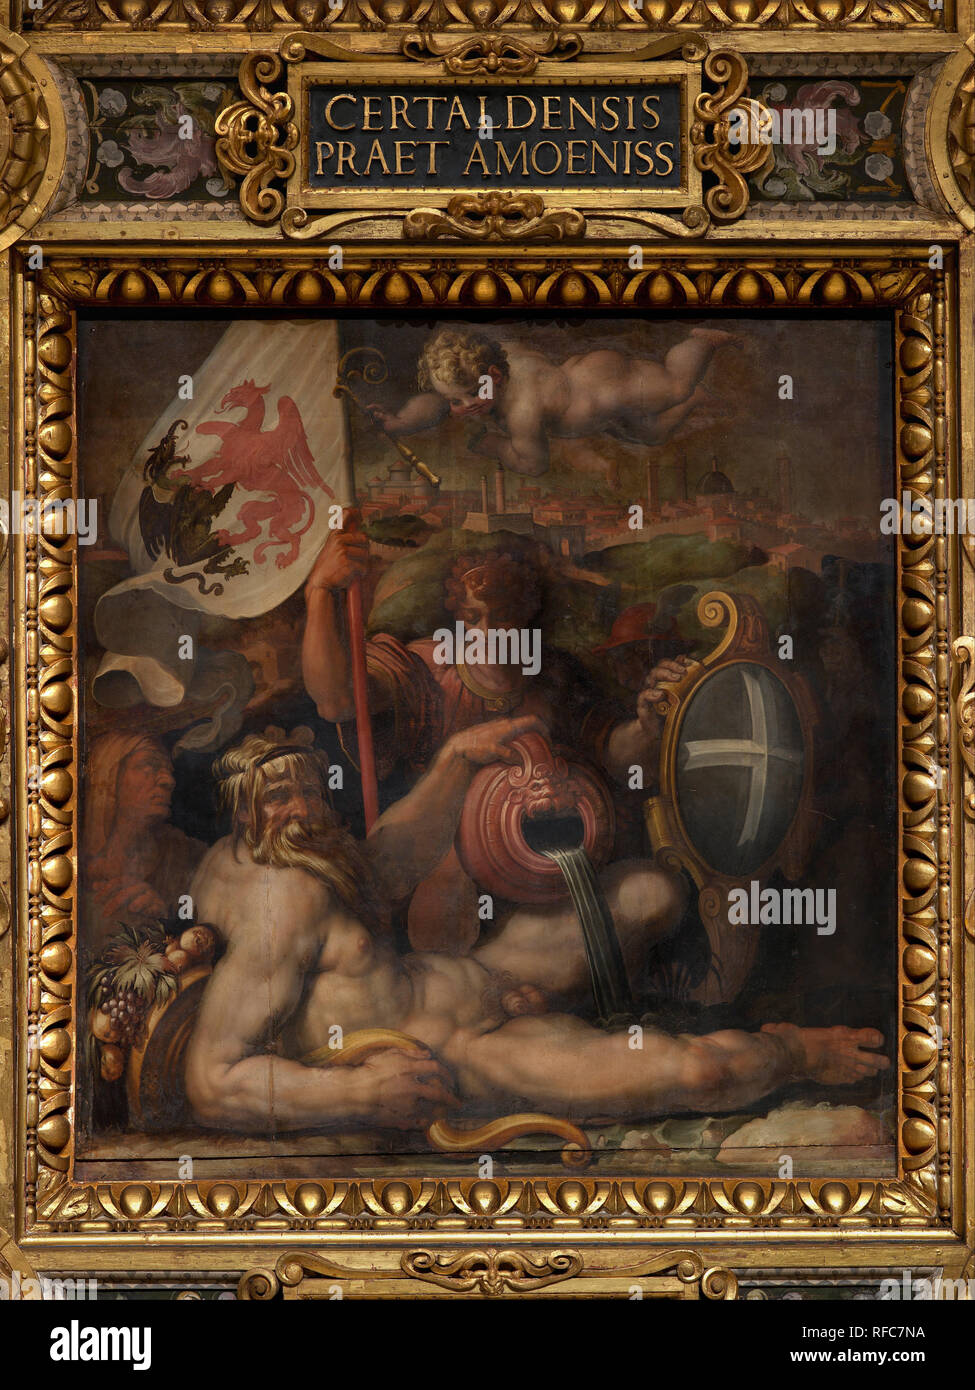 Allegory of Volterra. Date/Period: 1563 - 1565. Oil painting on wood. Height: 250 mm (9.84 in); Width: 250 mm (9.84 in). Author: Giorgio Vasari. VASARI, GIORGIO. Stock Photo